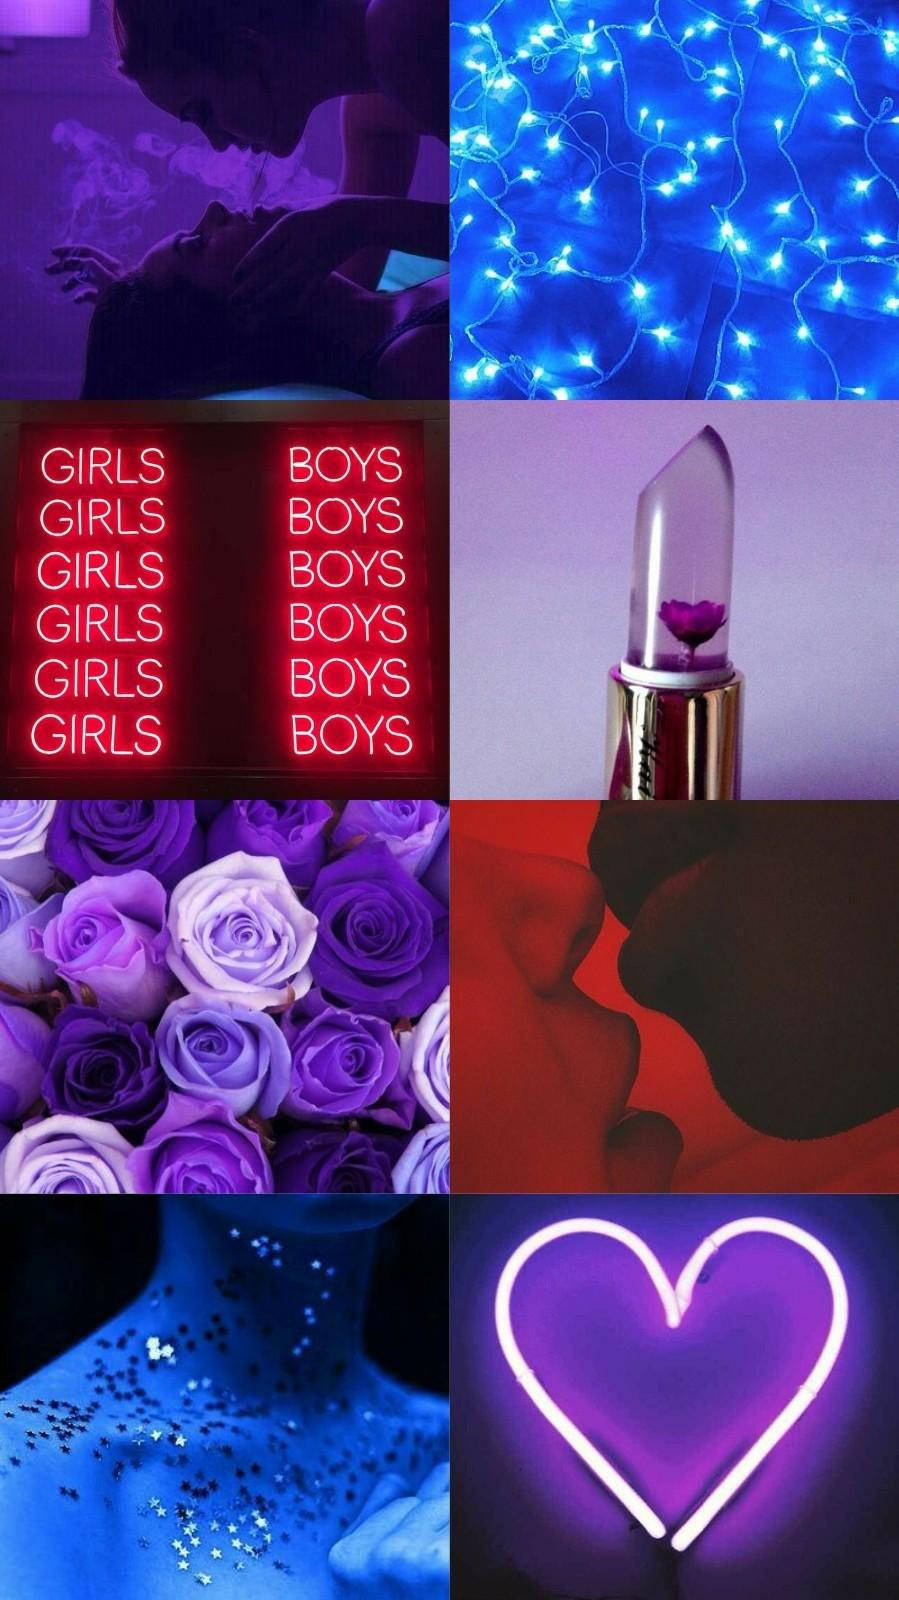 Bisexual Aesthetic Collage Background